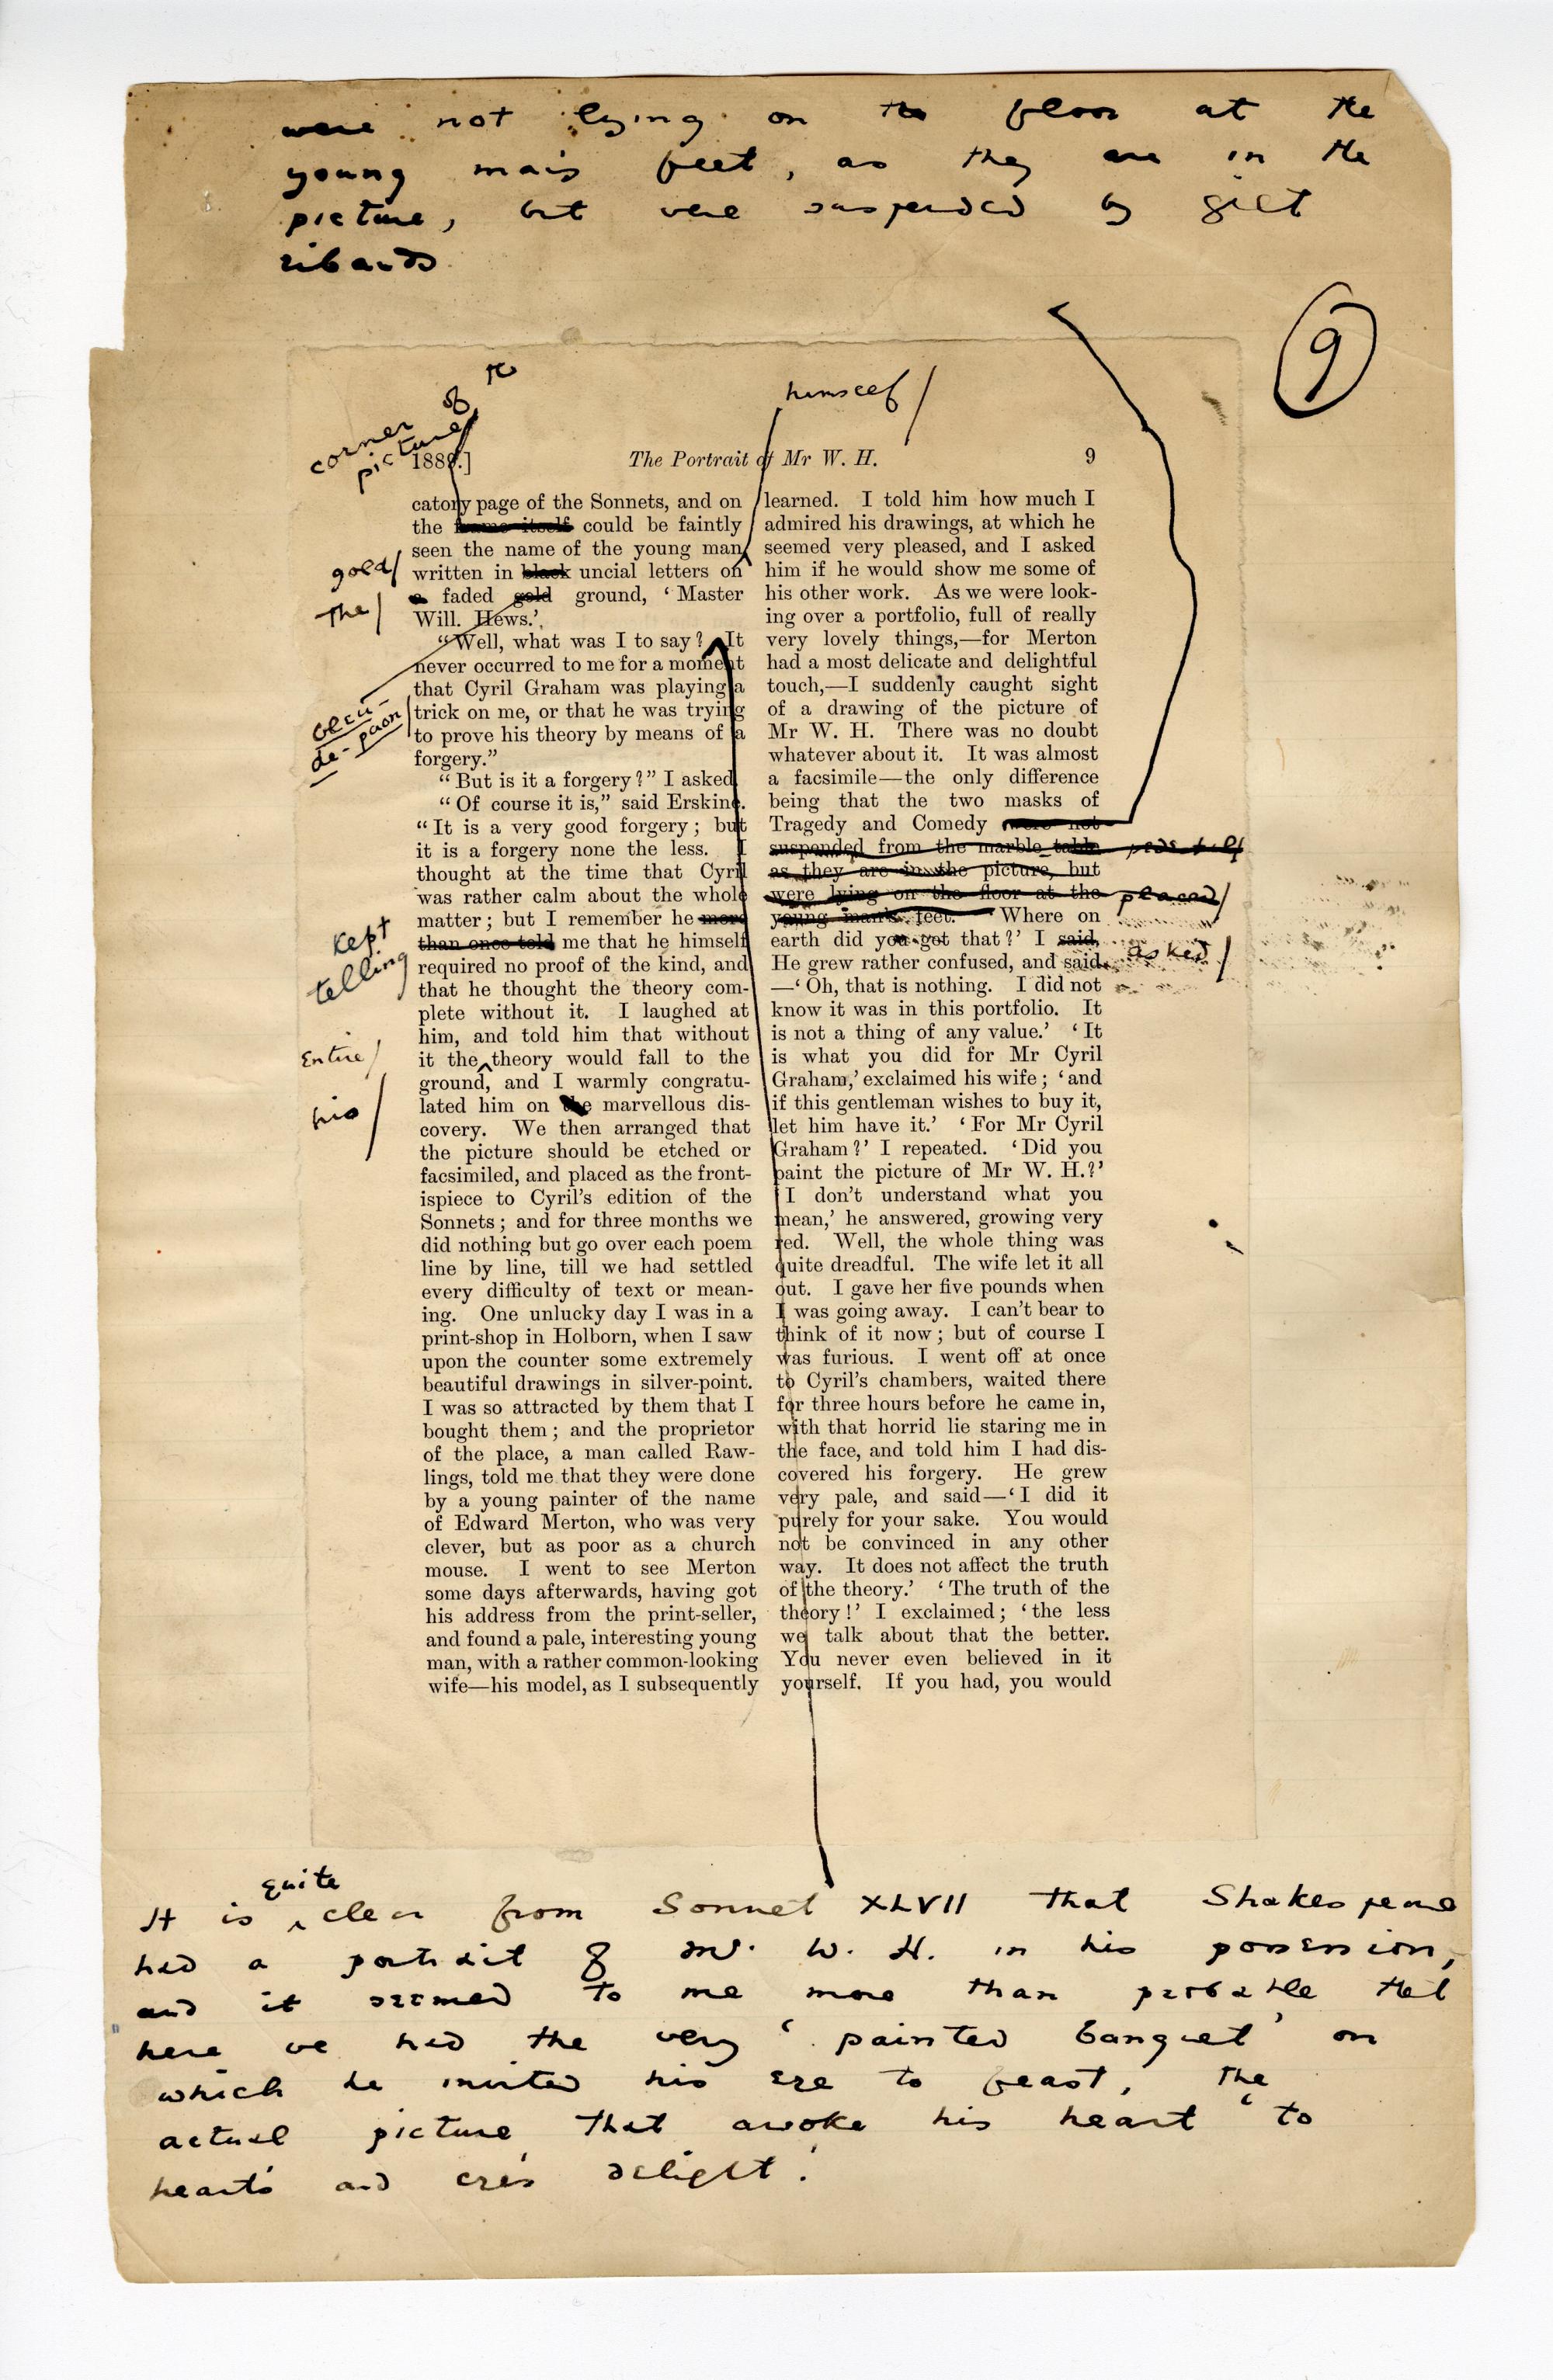 Folio 9 contains a full page (p.9) from the Blackwood's 1889 printing glued down onto a notebook page. Wilde's annotations are both on the Blackwood's page and additions in the top and bottom margins of the notebook page.